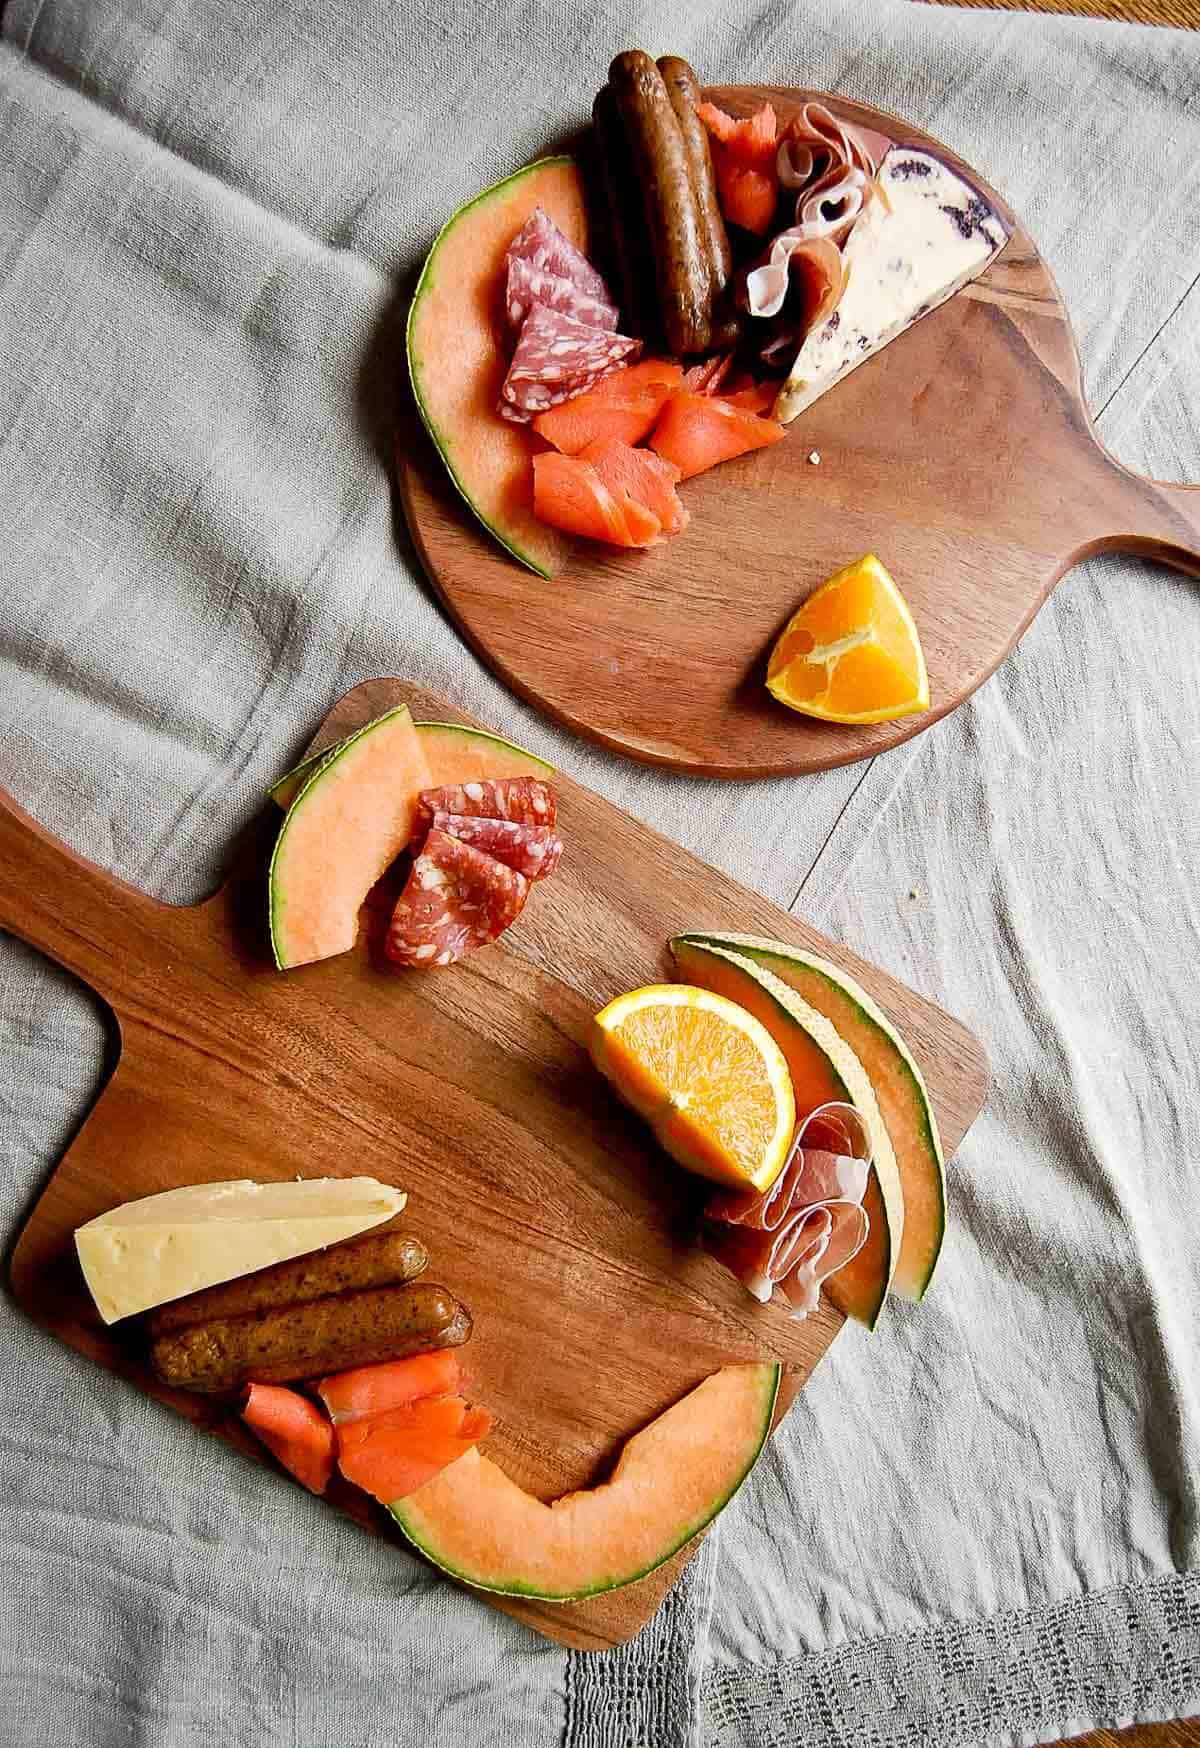 serving board with cheese, fruit and meats.